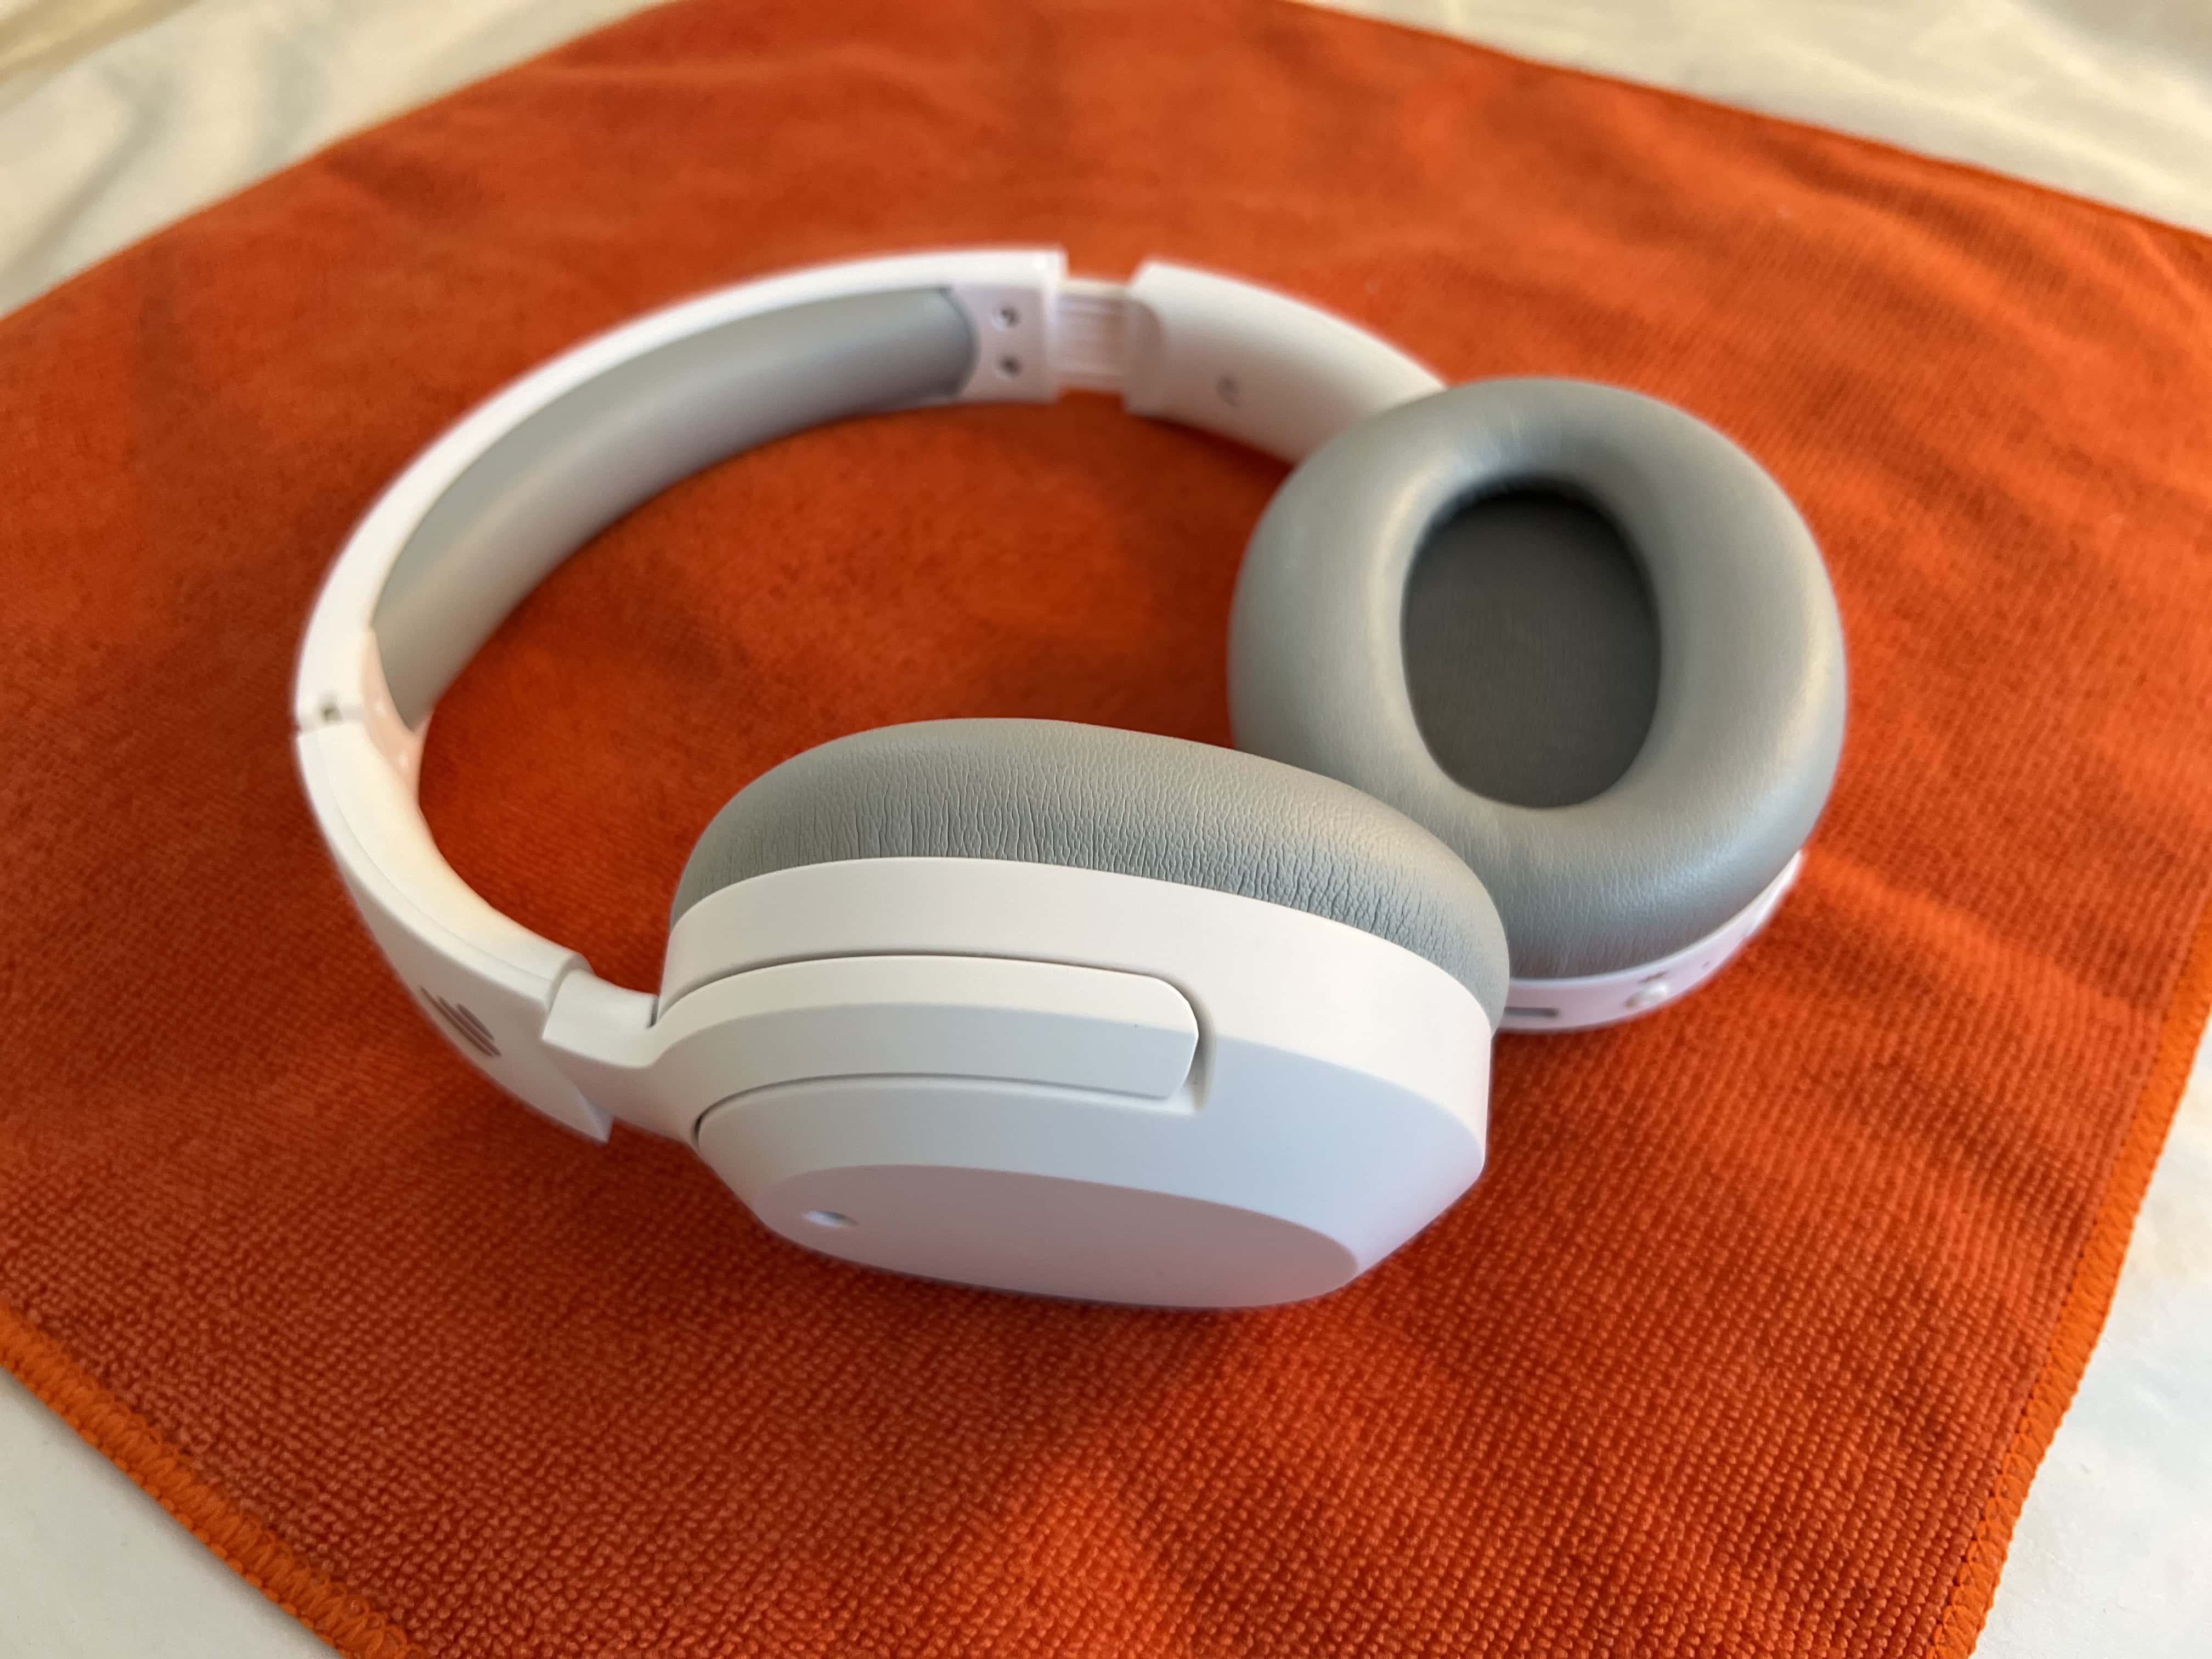 Affordable Edifier wireless ANC headphones get the basics right [Review]